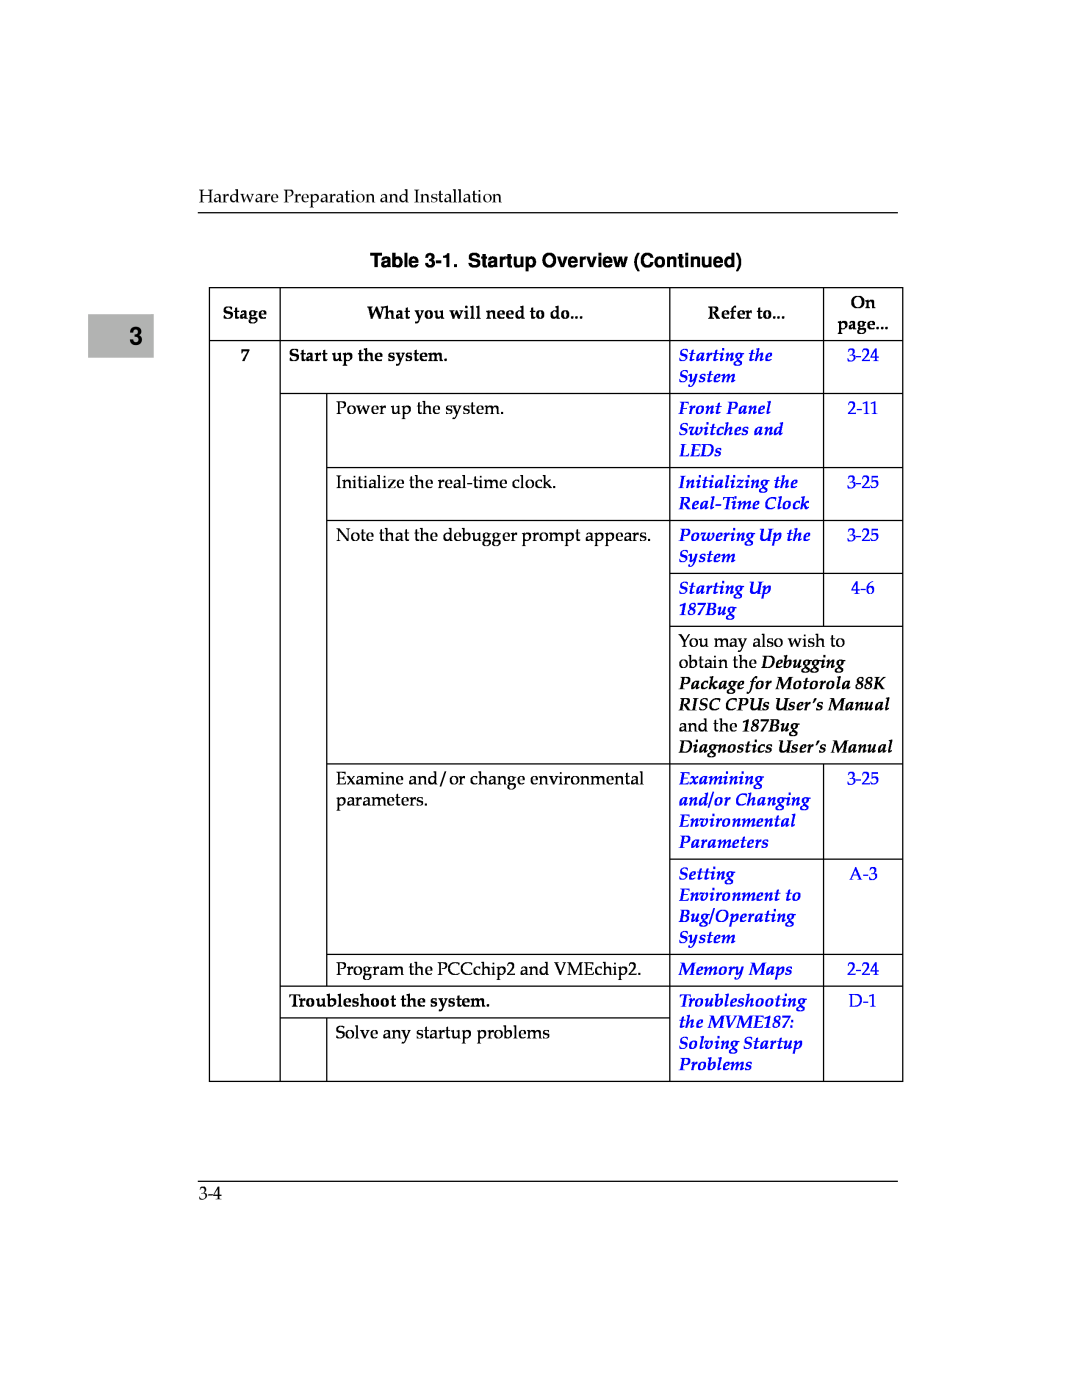 Motorola MVME187 manual 1. Startup Overview Continued, page, obtain the Debugging 